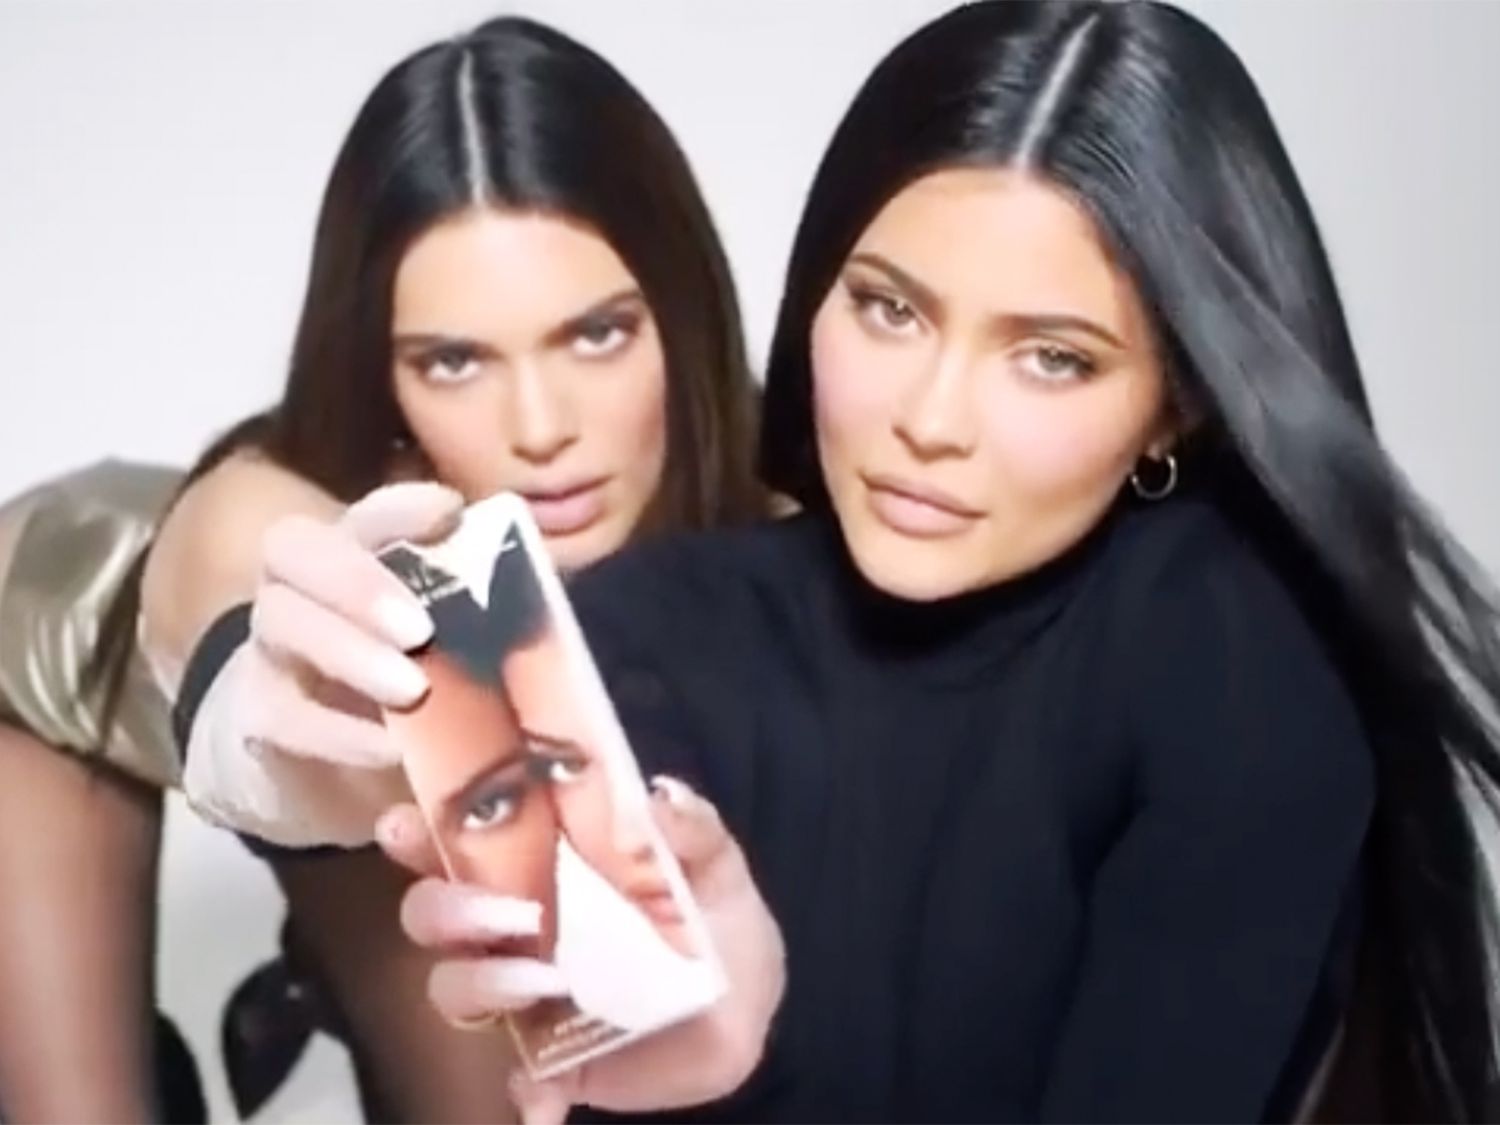 Kylie Jenner And Kendall Jenner Launch Kylie Cosmetics Collaboration People Com Kylie cosmetics is by far her biggest earner. kylie jenner and kendall jenner launch